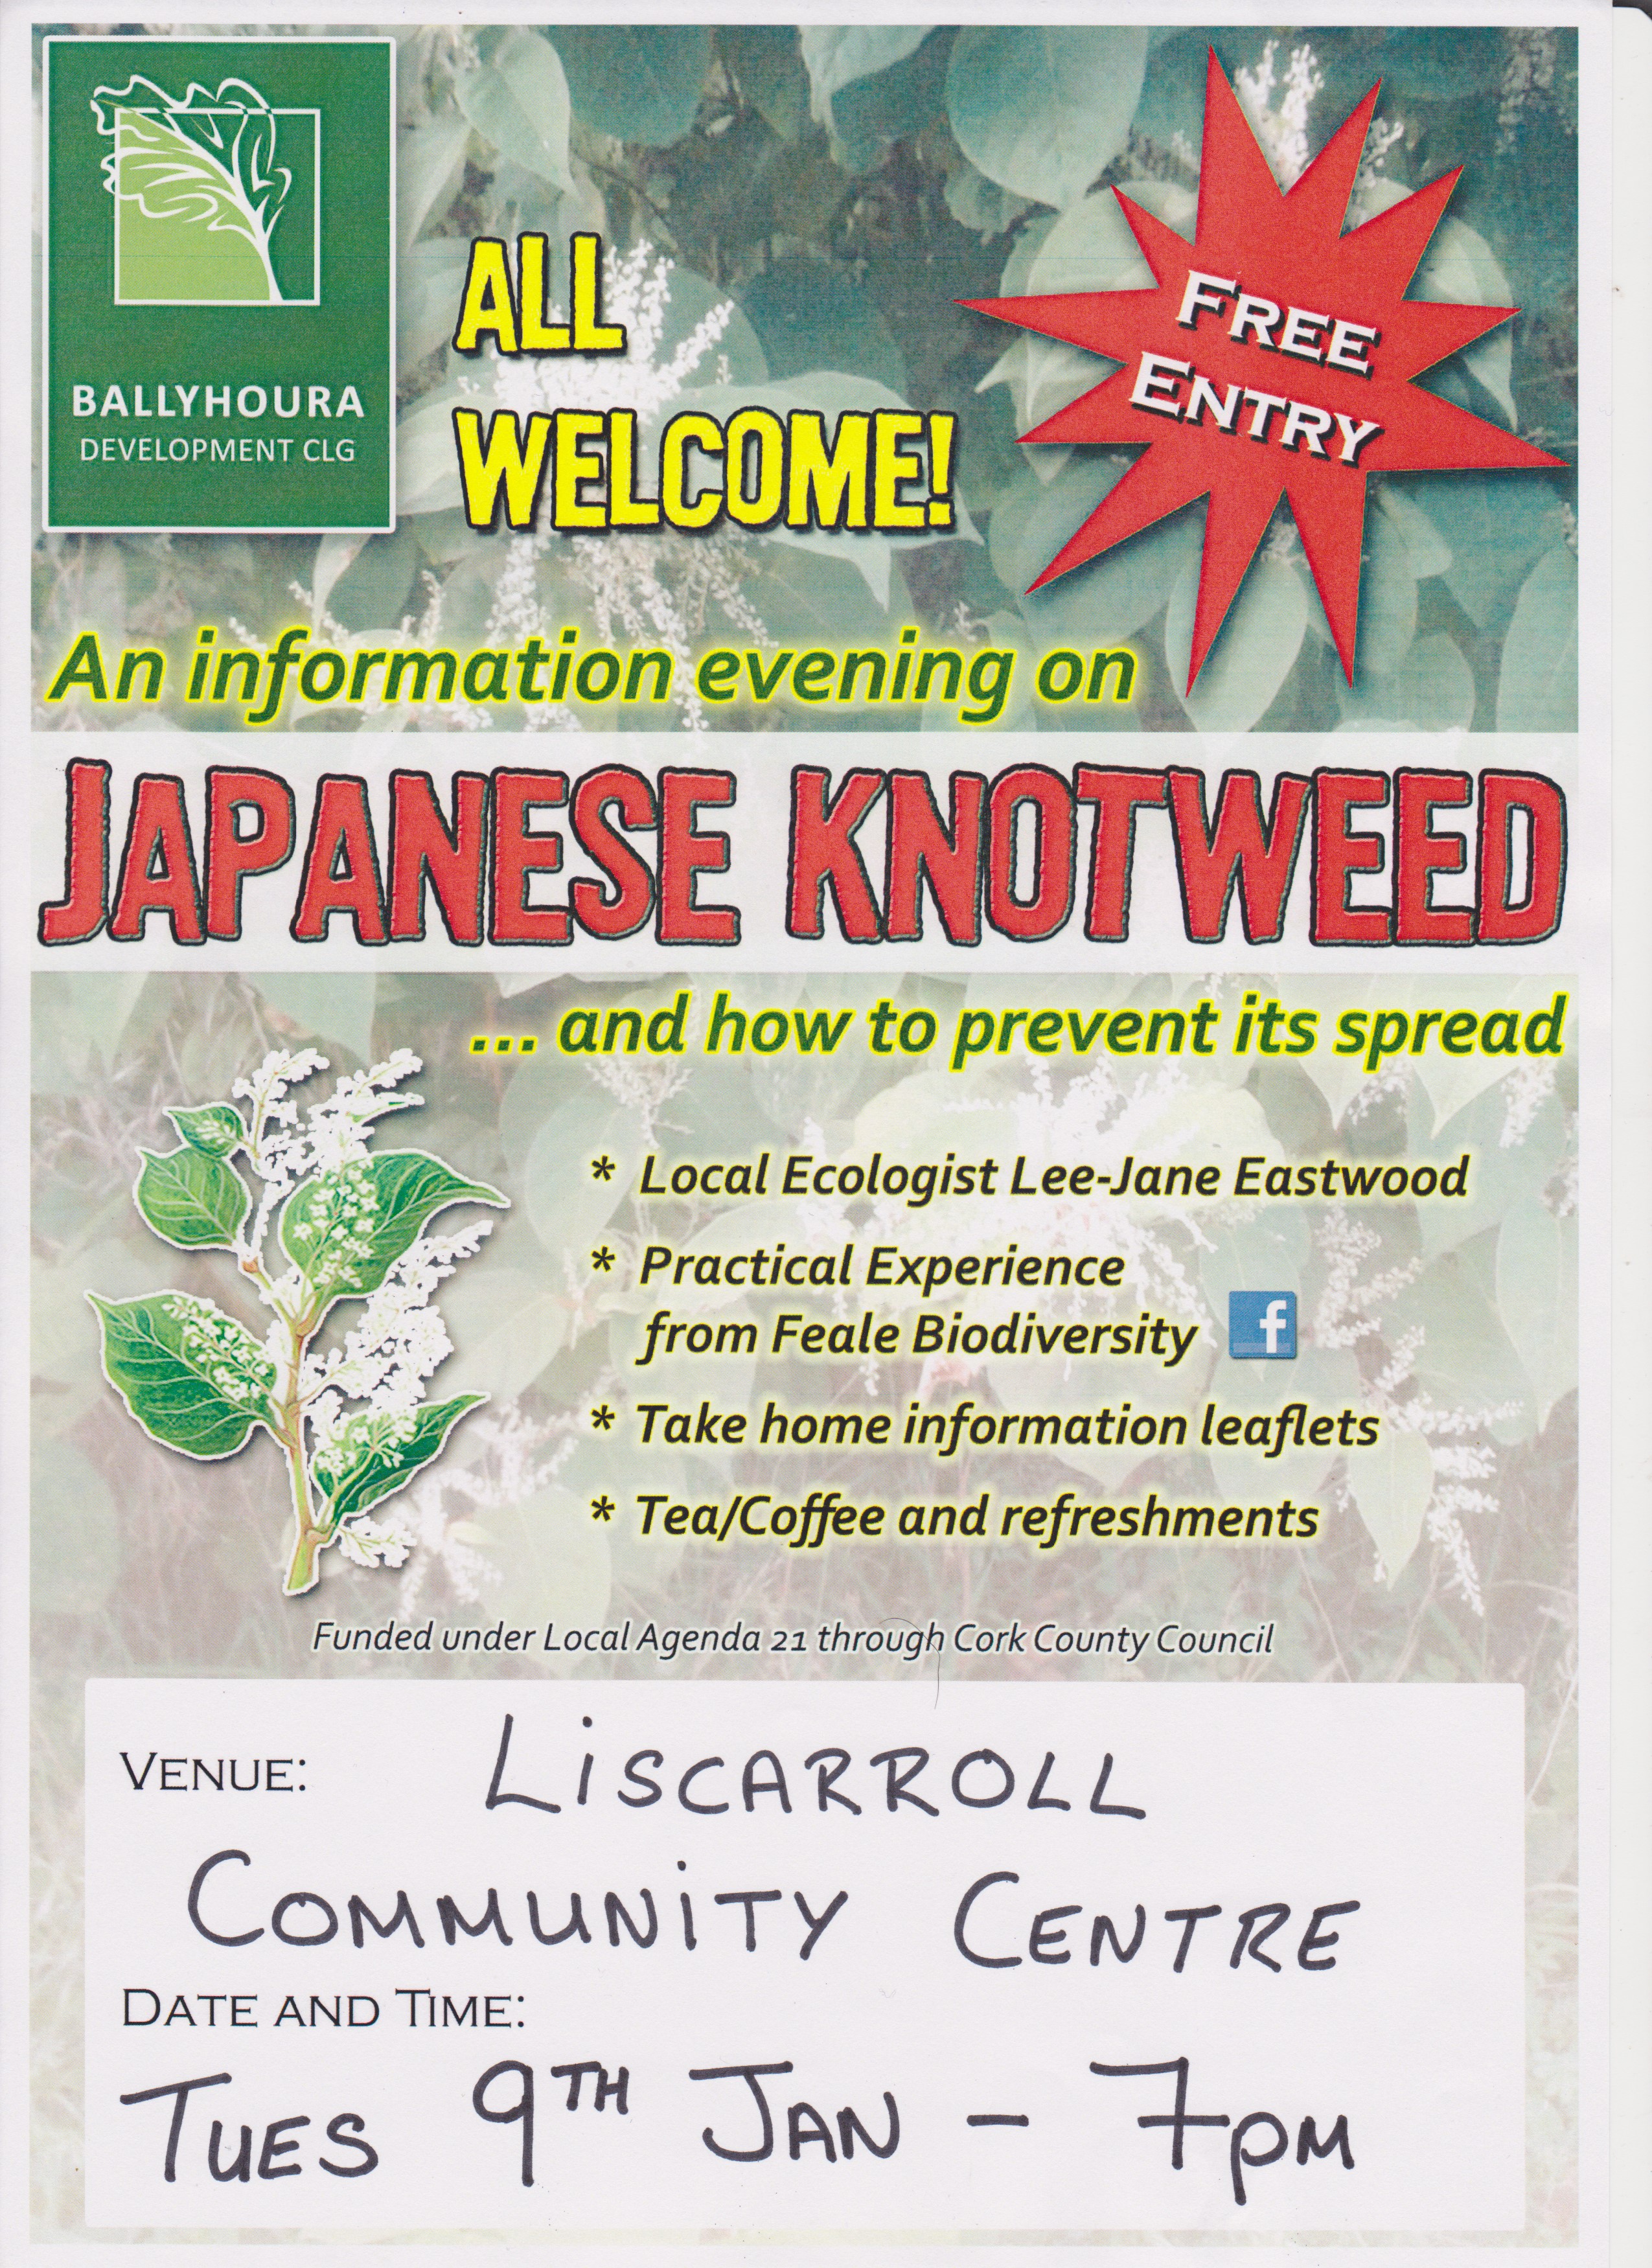 Knowing Japanese Knotweed – Info Evening at Liscarroll Community Centre